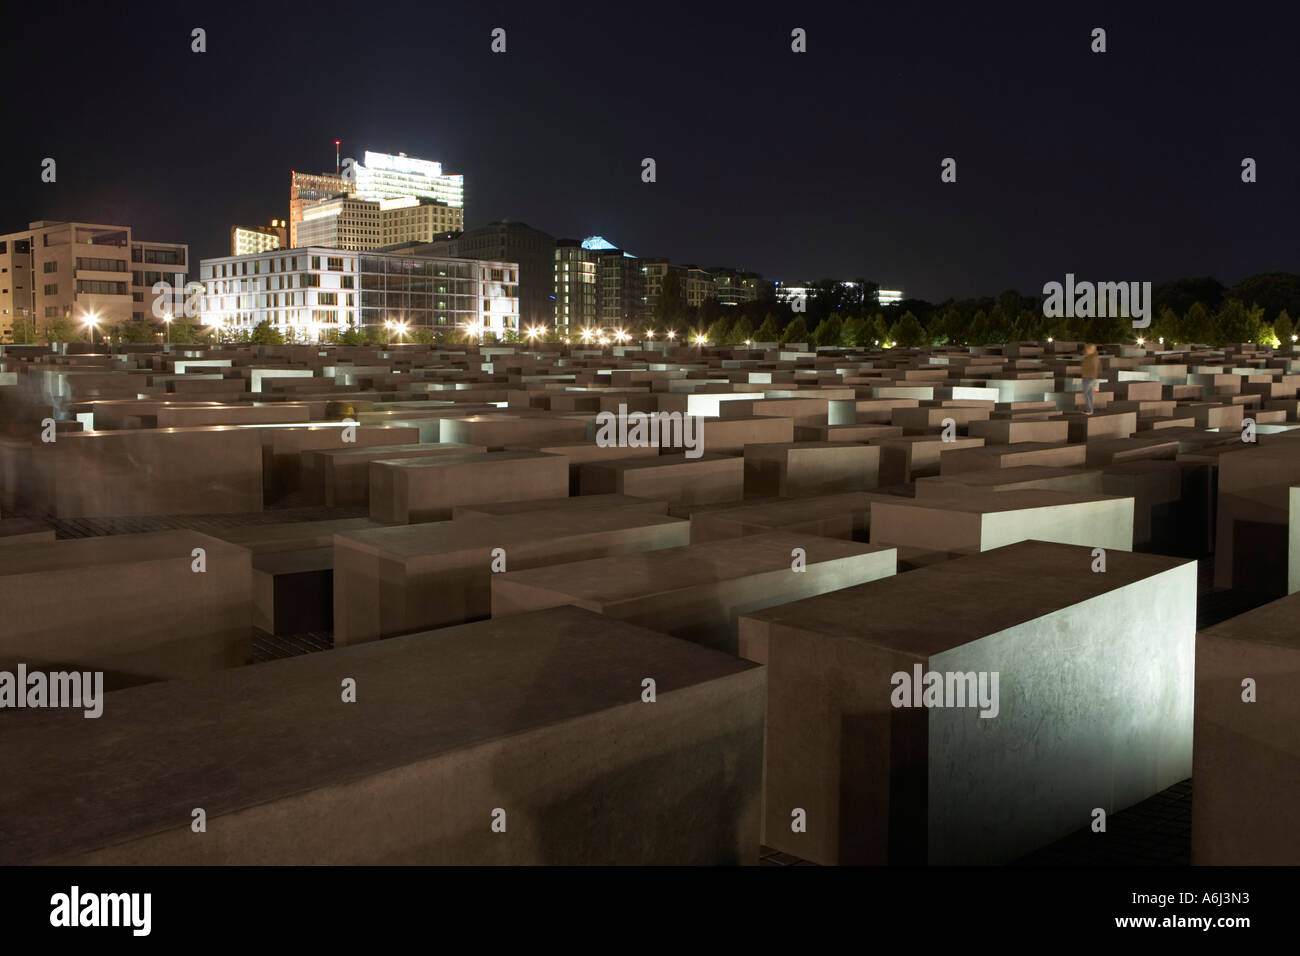 The lit Holocaust memorial at night with view of the multistoried buildings at the Potsdamer place, Berlin, Germany Stock Photo